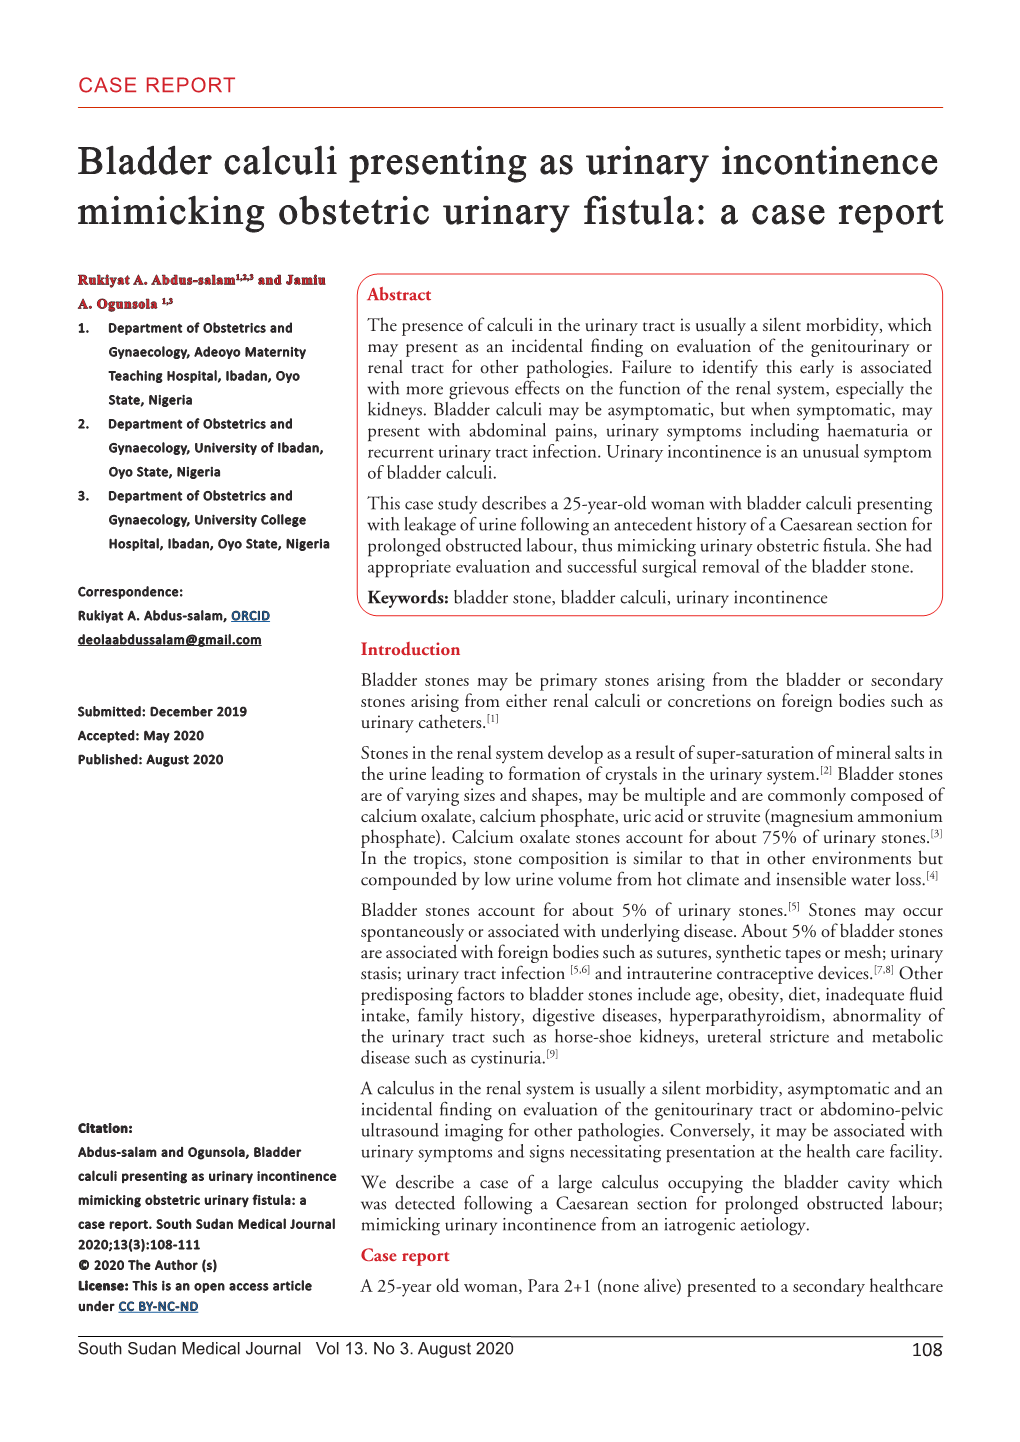 Bladder Calculi Presenting As Urinary Incontinence Mimicking Obstetric Urinary Fistula: a Case Report